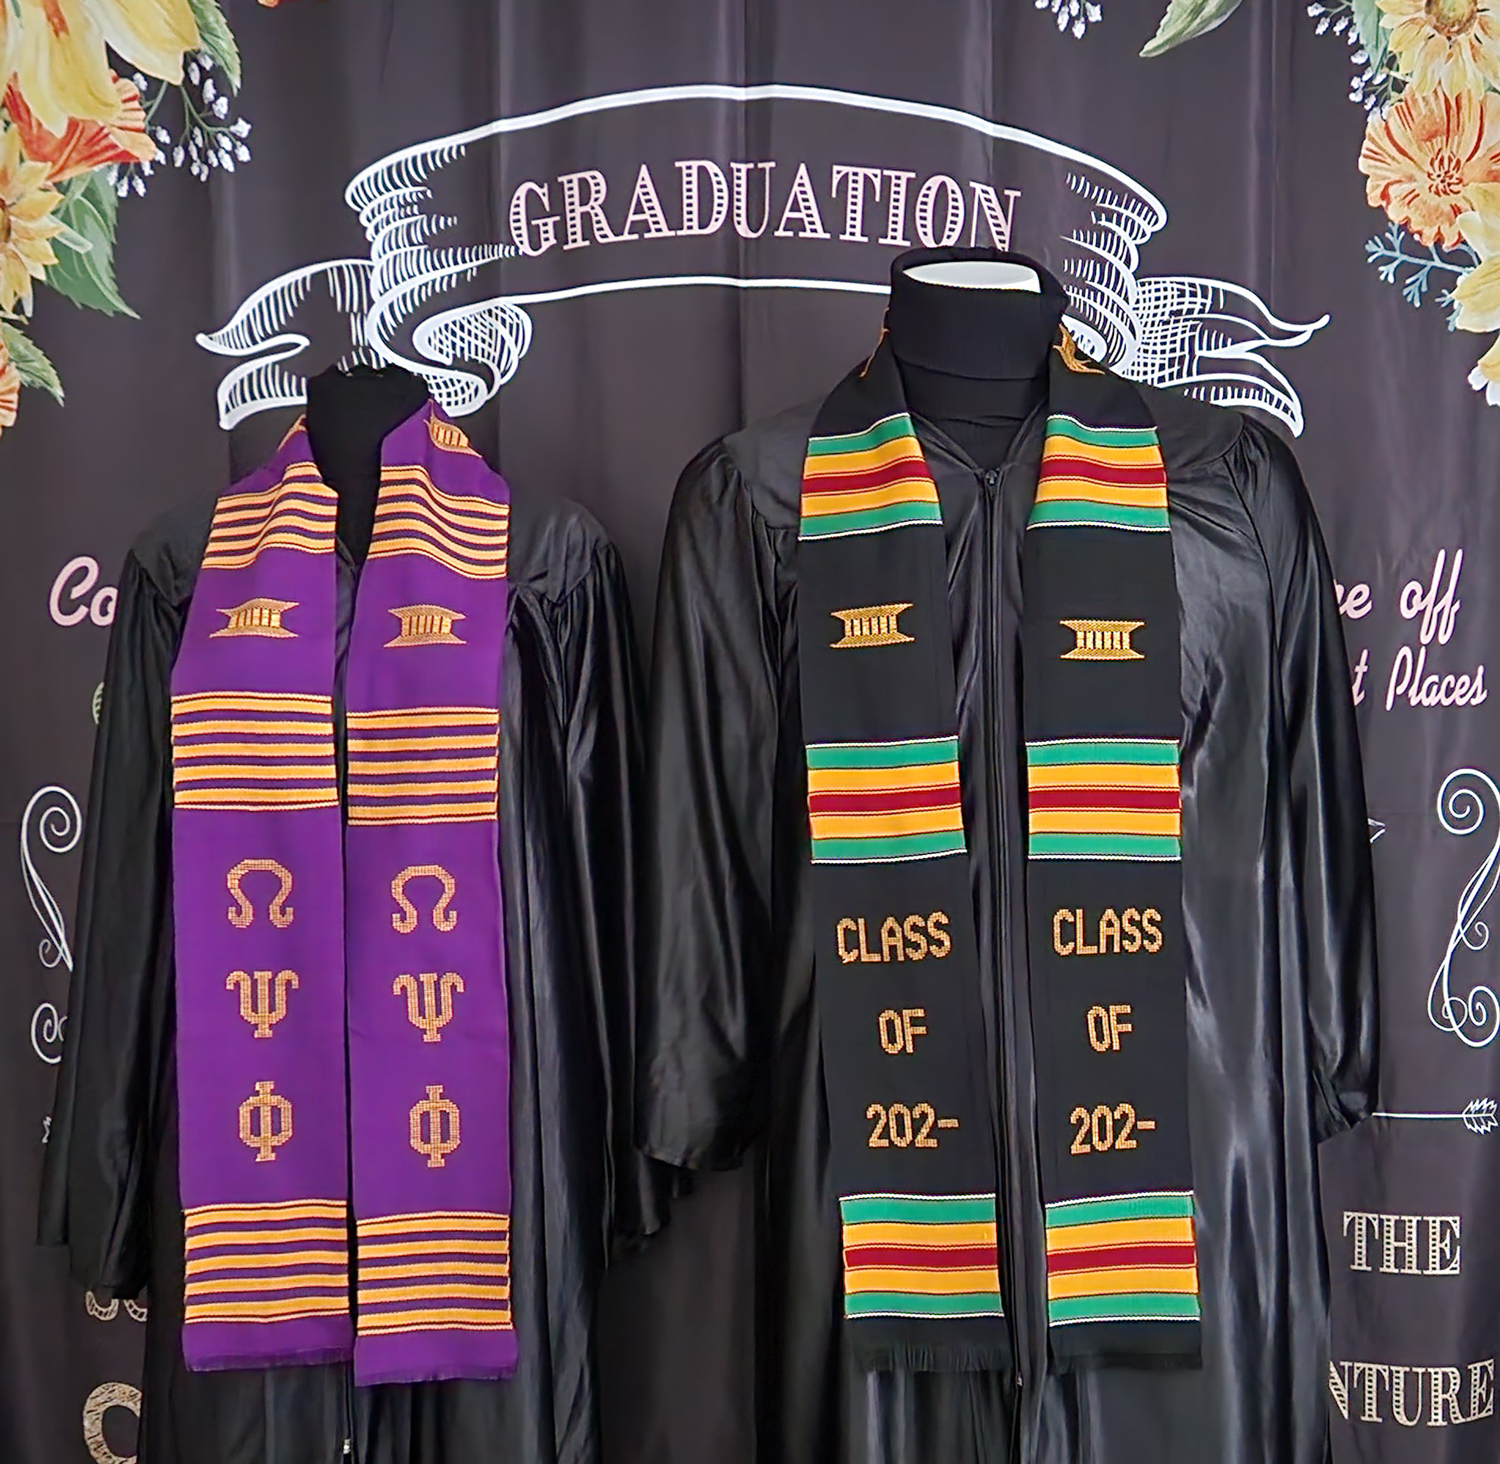 CLASS OF 2023 and OMEGA PSI PHI Kente Stoles